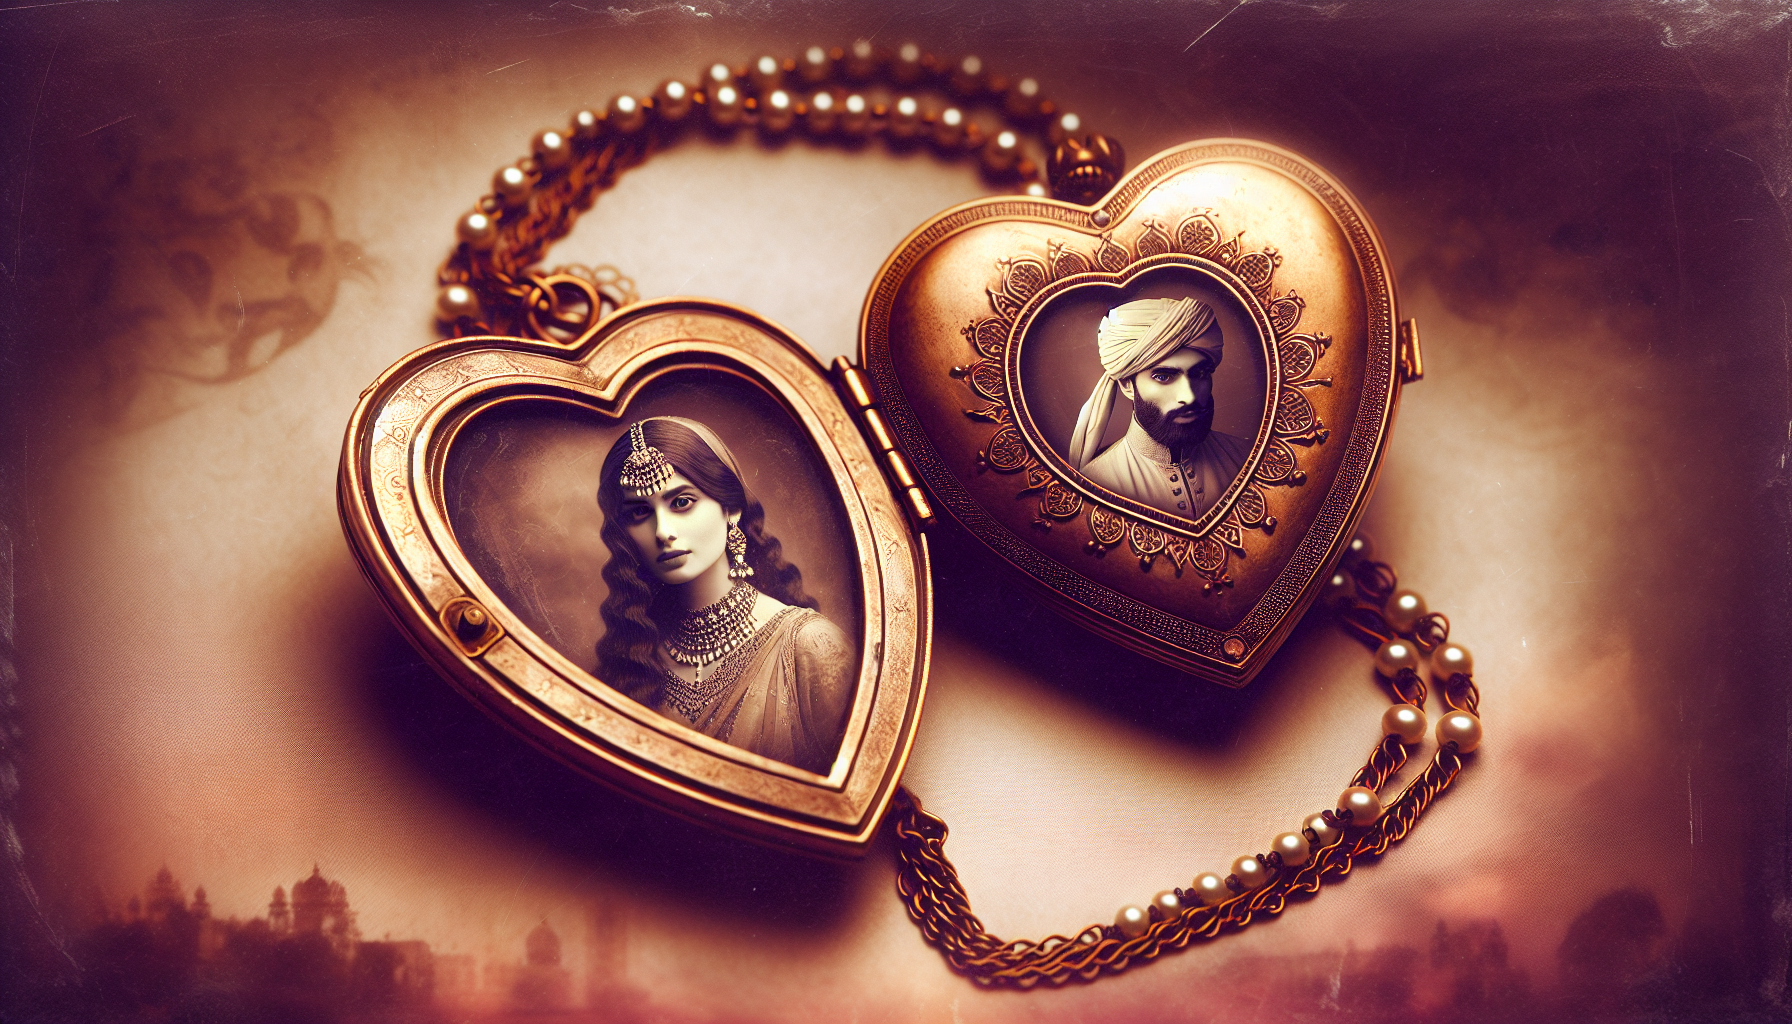 A visual depiction of a heart-shaped antique locket that is open to reveal a pair of old sepia-toned photos. The photos in the locket capture two intimate memories; the first portrays a South Asian ma